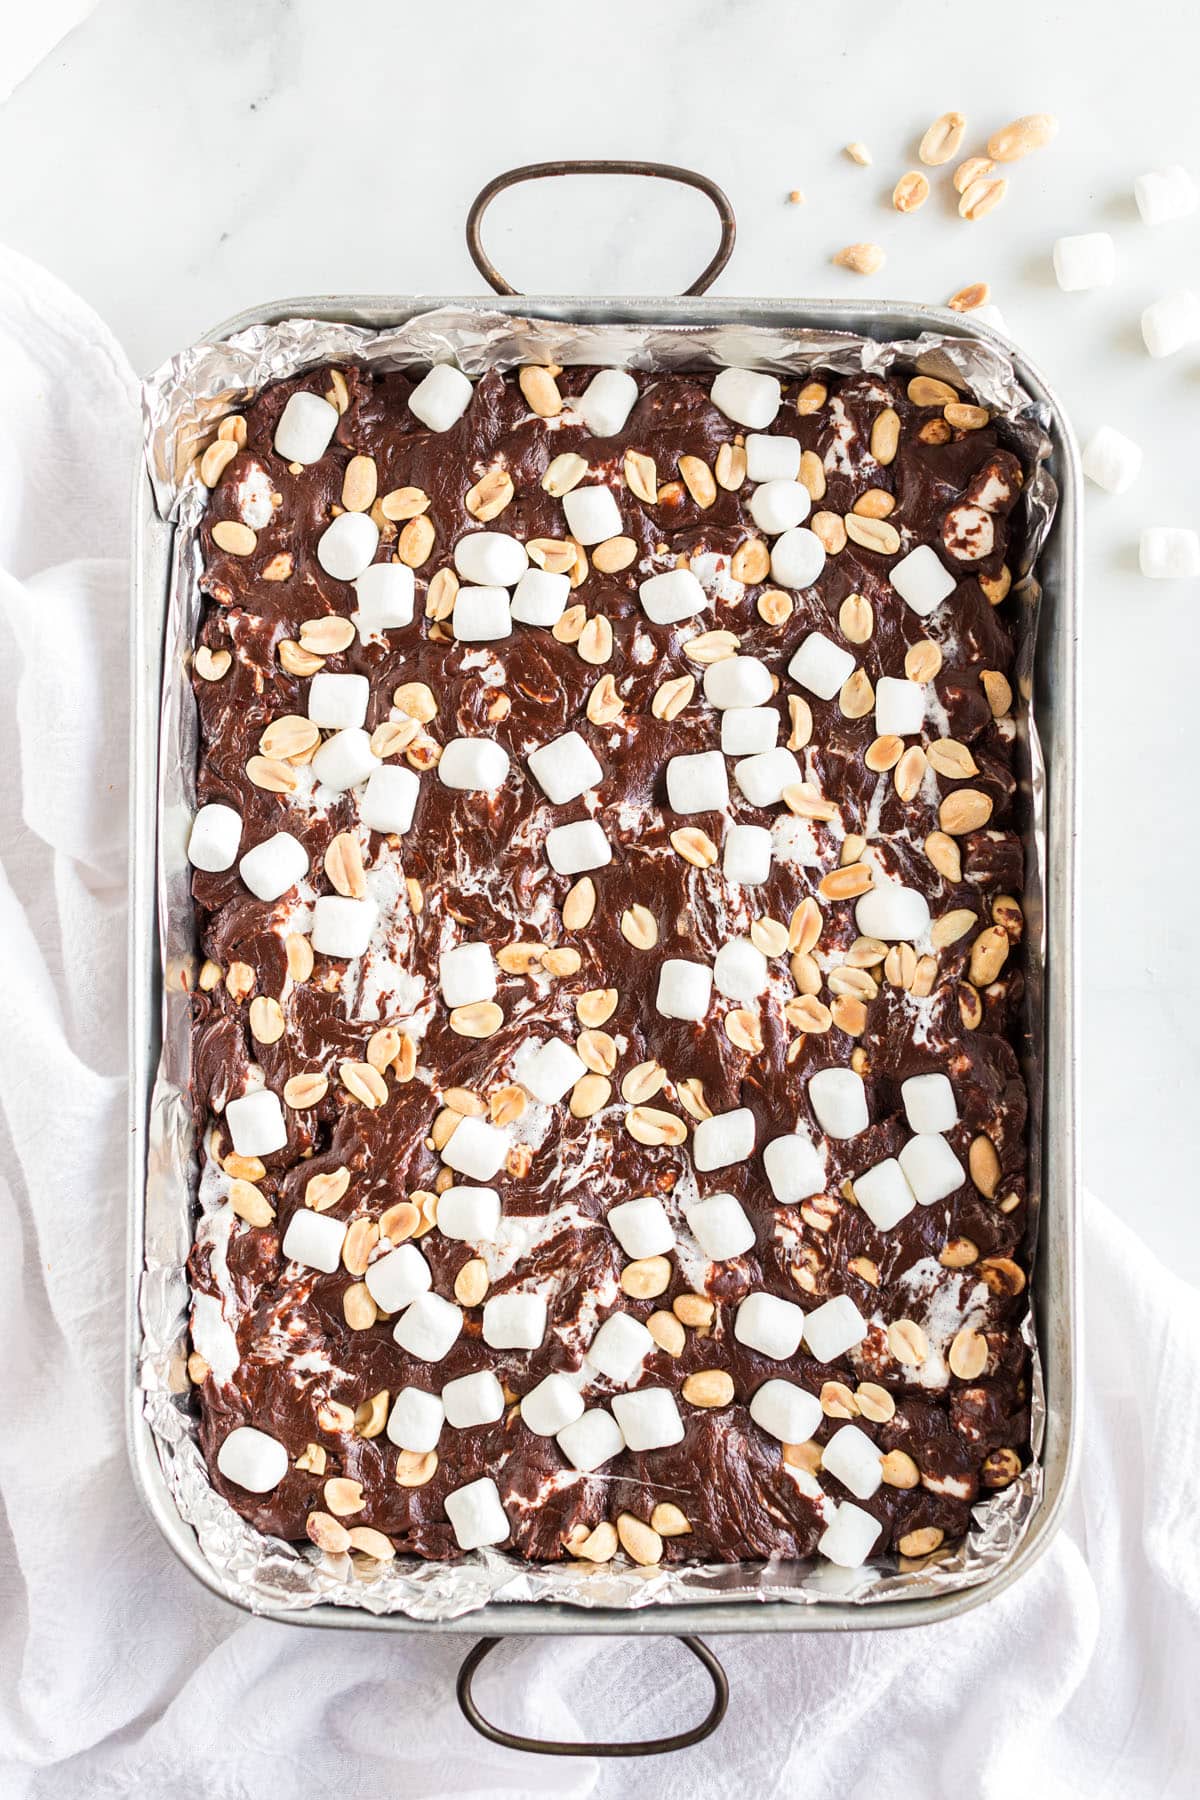 sprinkle additional marshmallow and peanuts on top